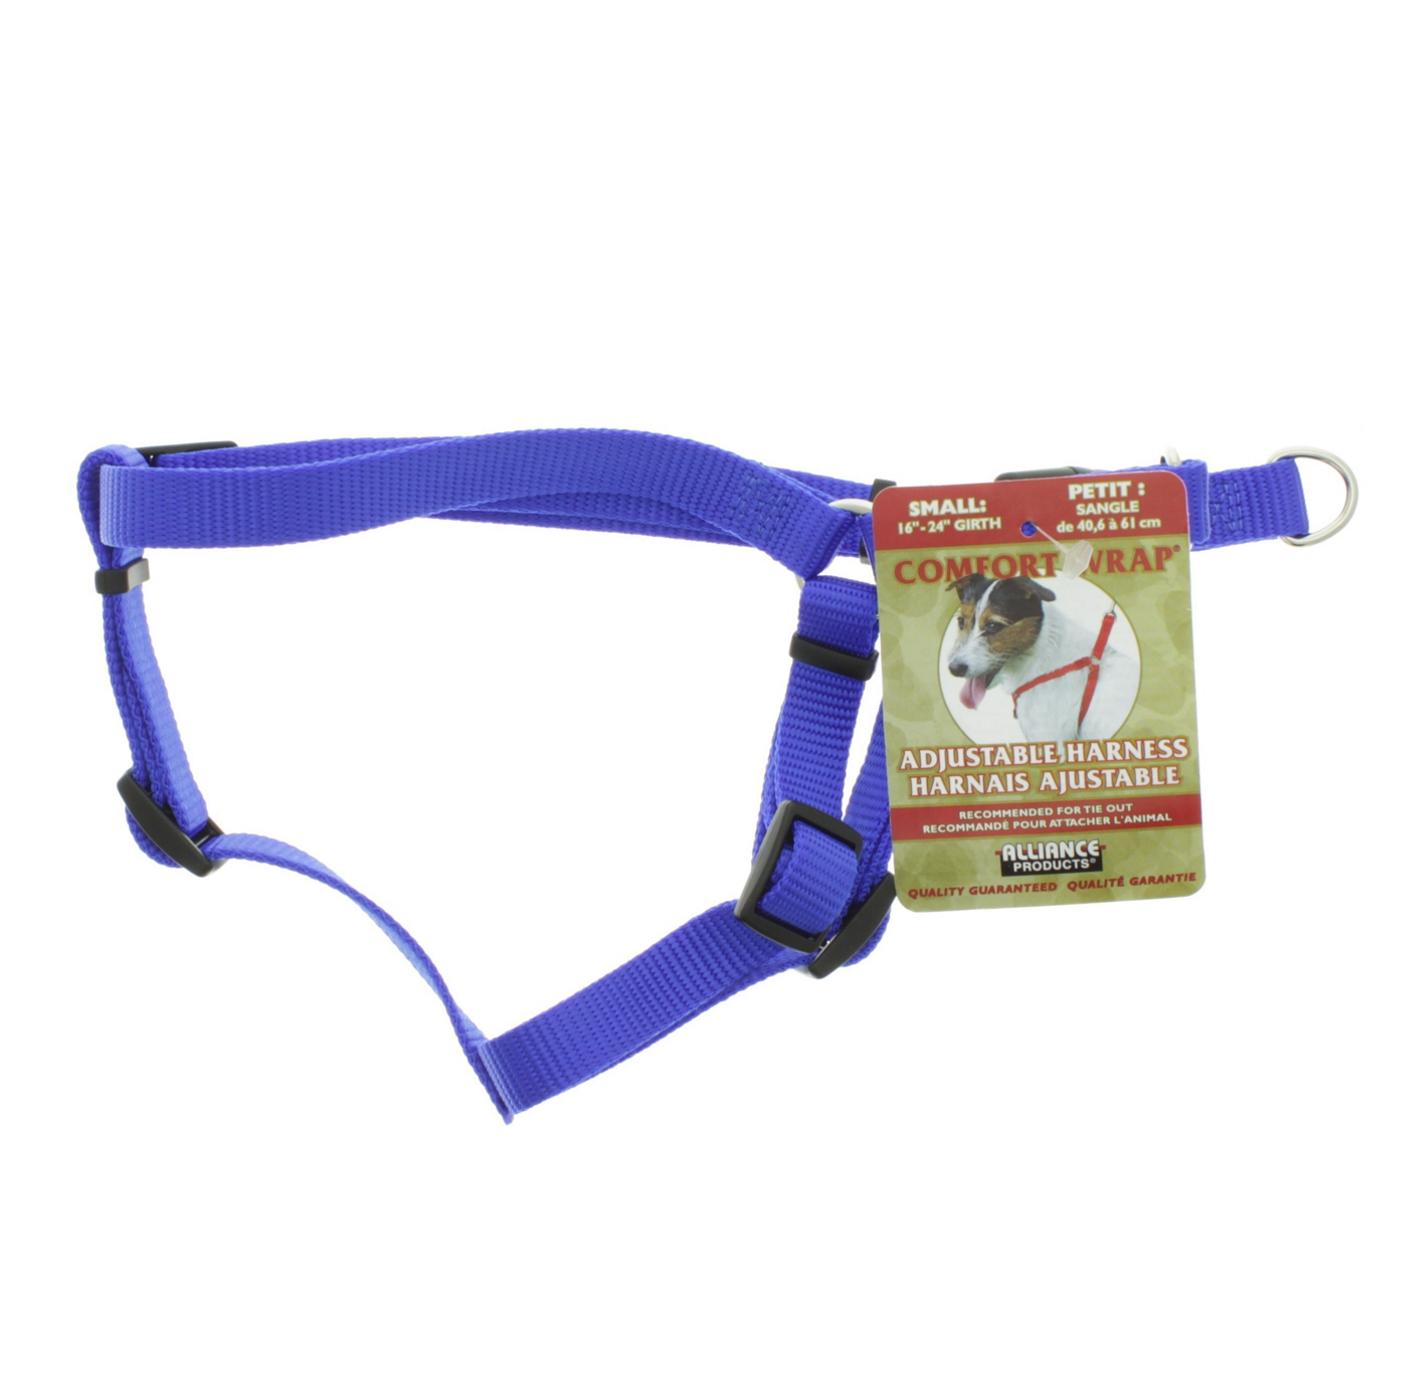 Alliance Comfort Wrap Small Harness Assorted Colors; image 3 of 3